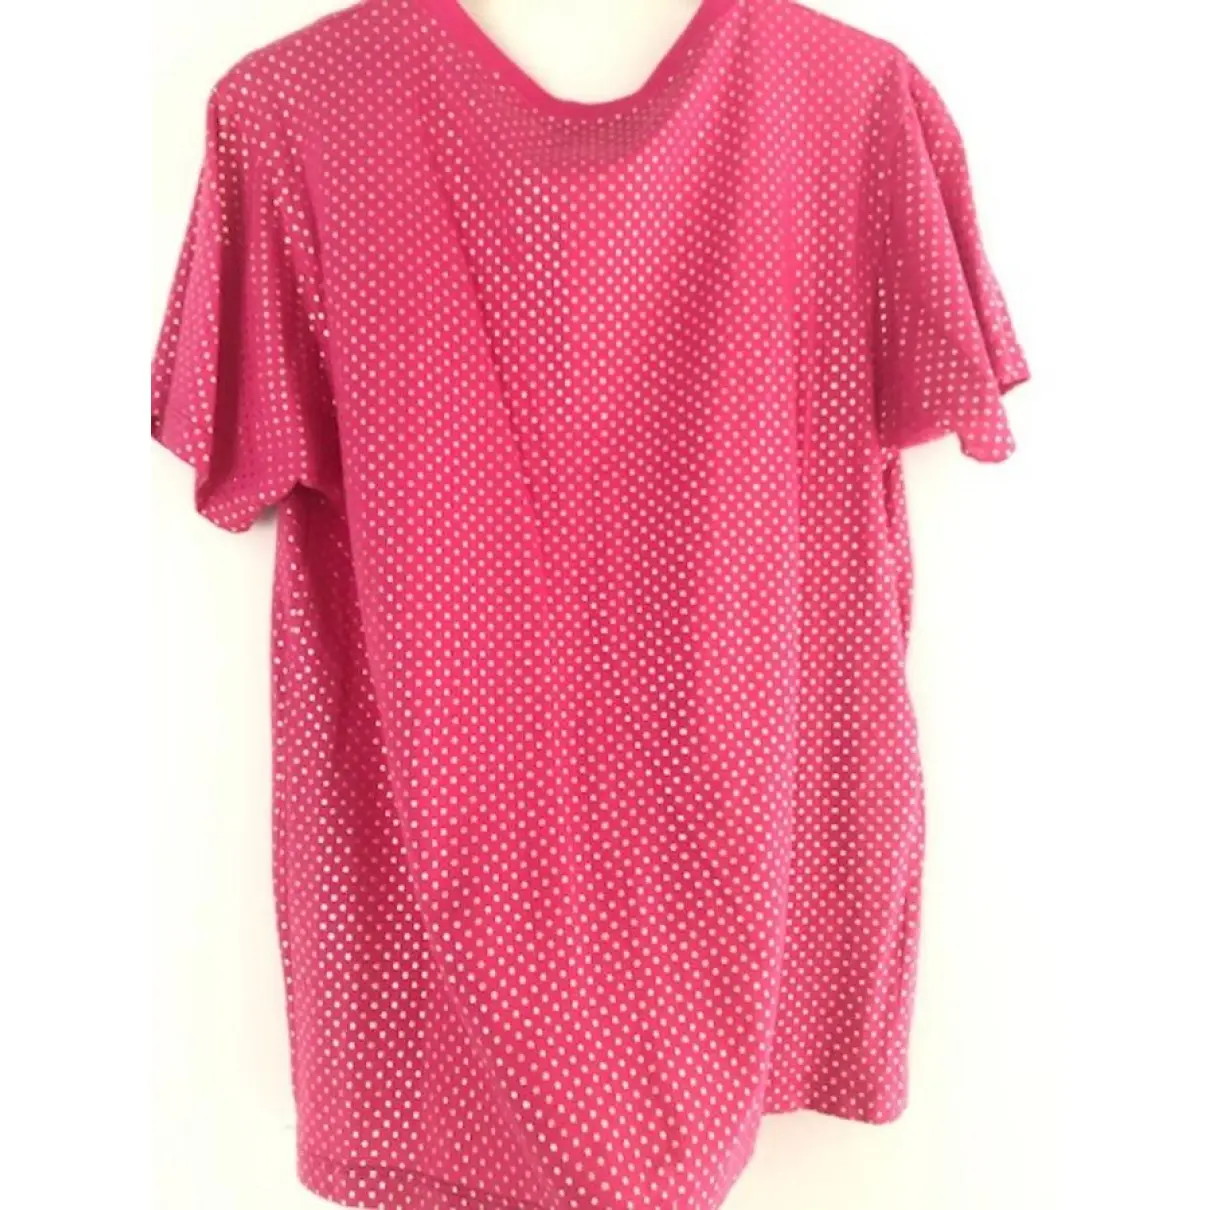 Buy Gucci Pink Cotton Top online